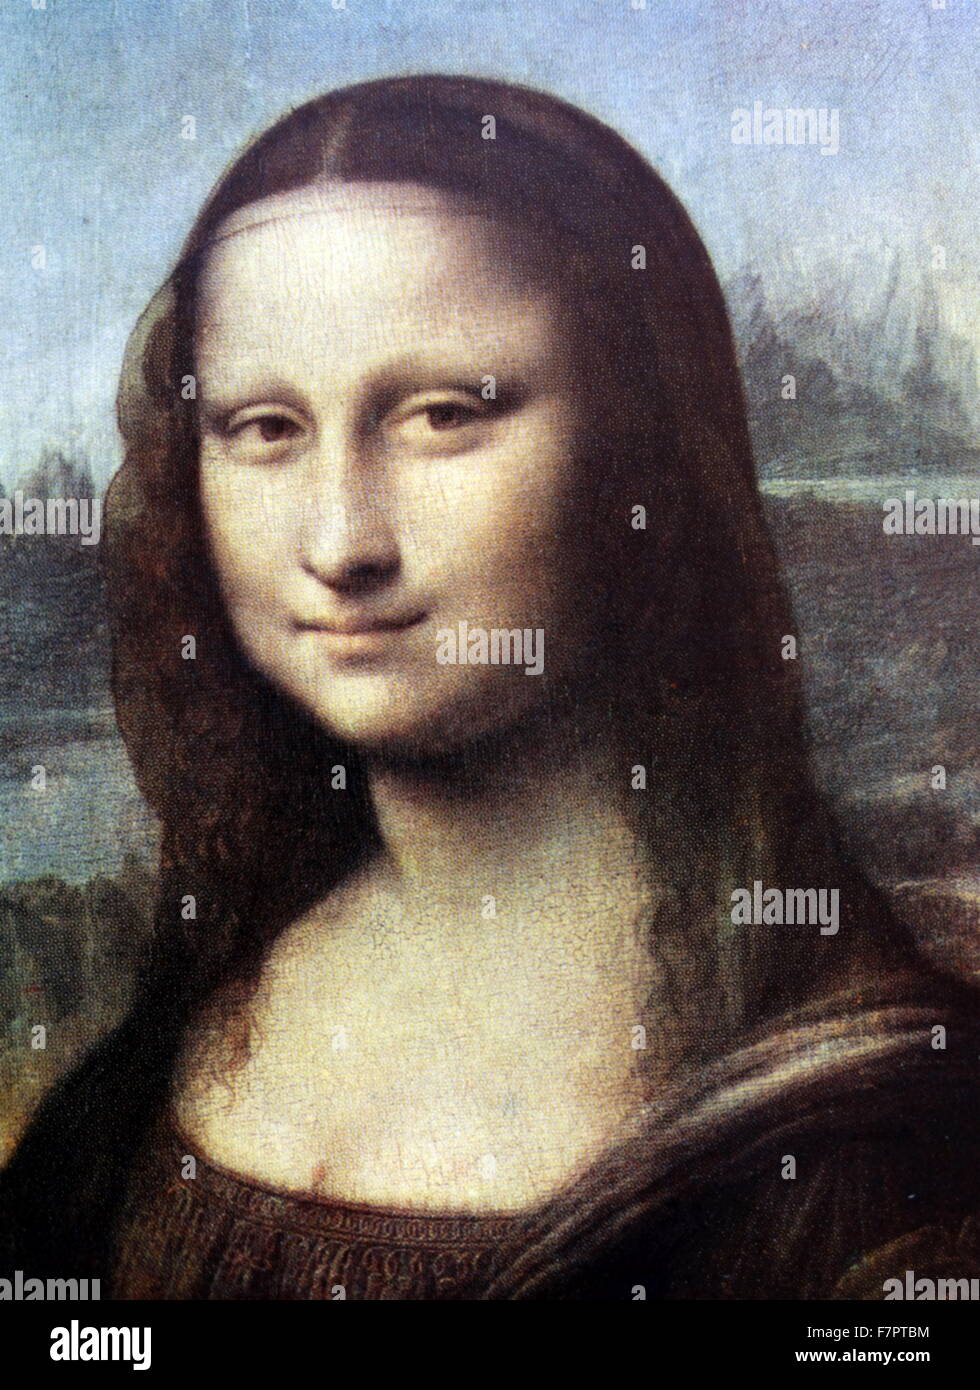 Detail from the Mona Lisa or La Gioconda or La Joconde, by the Italian artist Leonardo da Vinci, 1452 – 1519. The painting, thought to be a portrait of Lisa Gherardini, the wife of Francesco del Giocondo, is in oil on a white Lombardy poplar panel, and is believed to have been painted between 1503 and 1506. Stock Photo